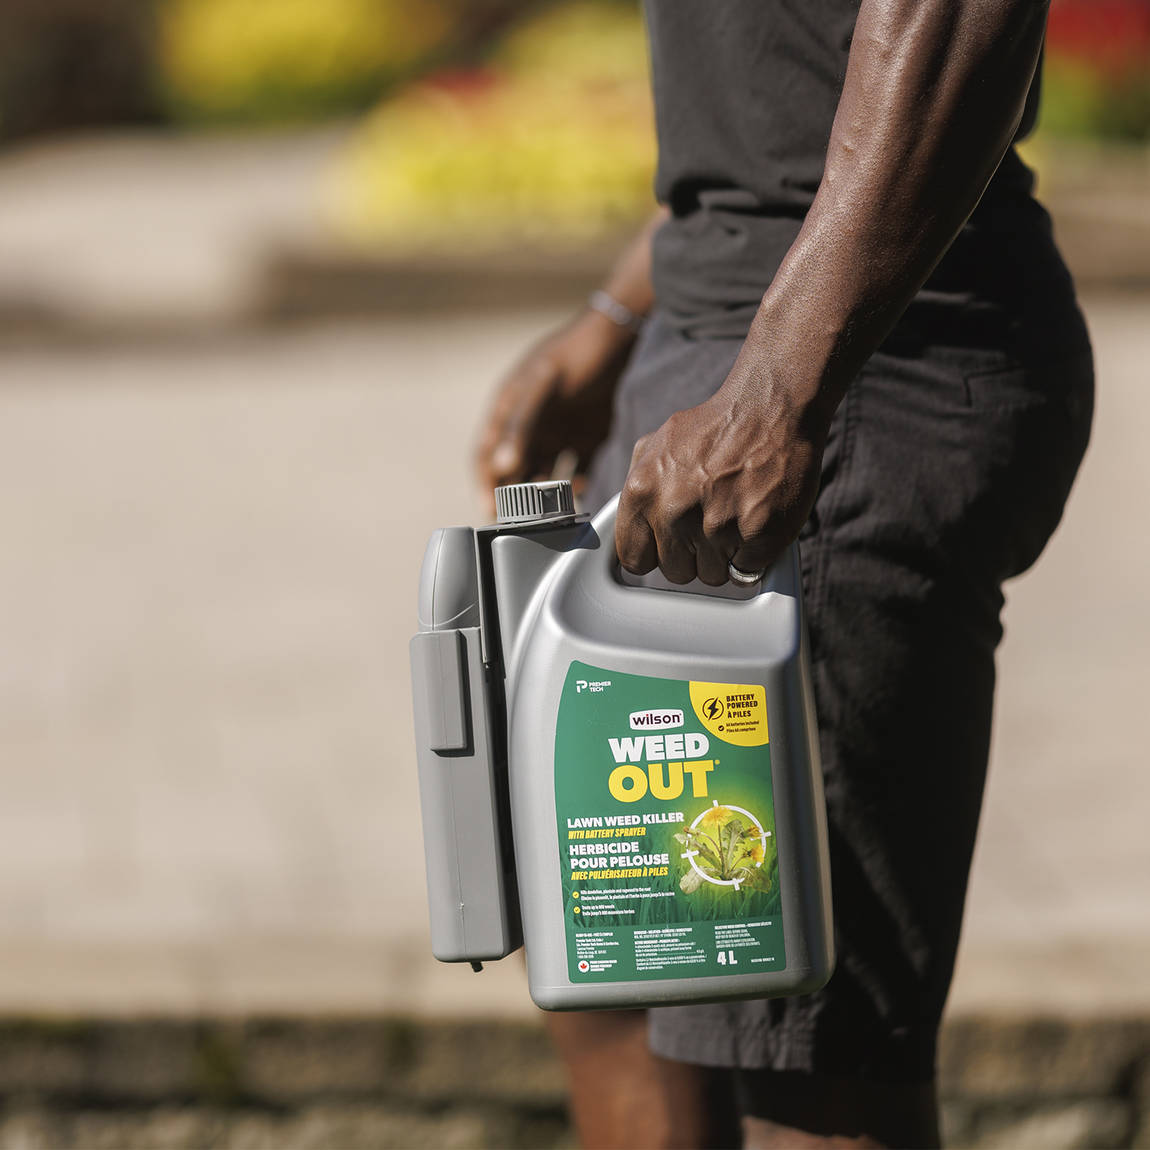 wilson-weed-out-lawn-weed-killer-4l-3